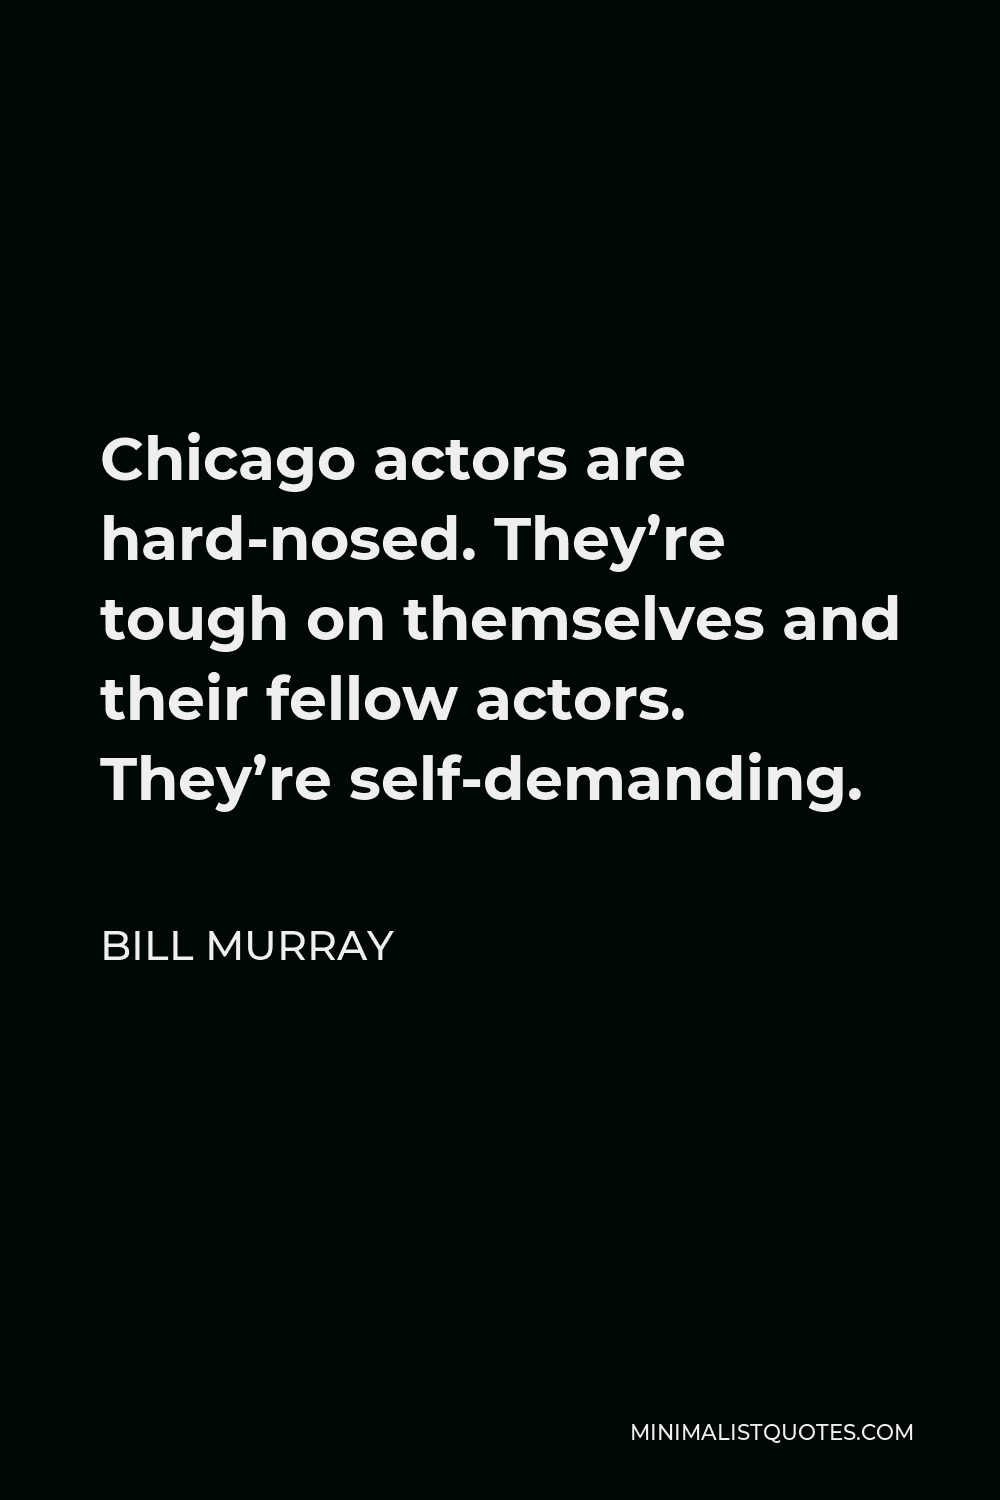 Bill Murray Quote - Chicago actors are hard-nosed. They’re tough on themselves and their fellow actors. They’re self-demanding.